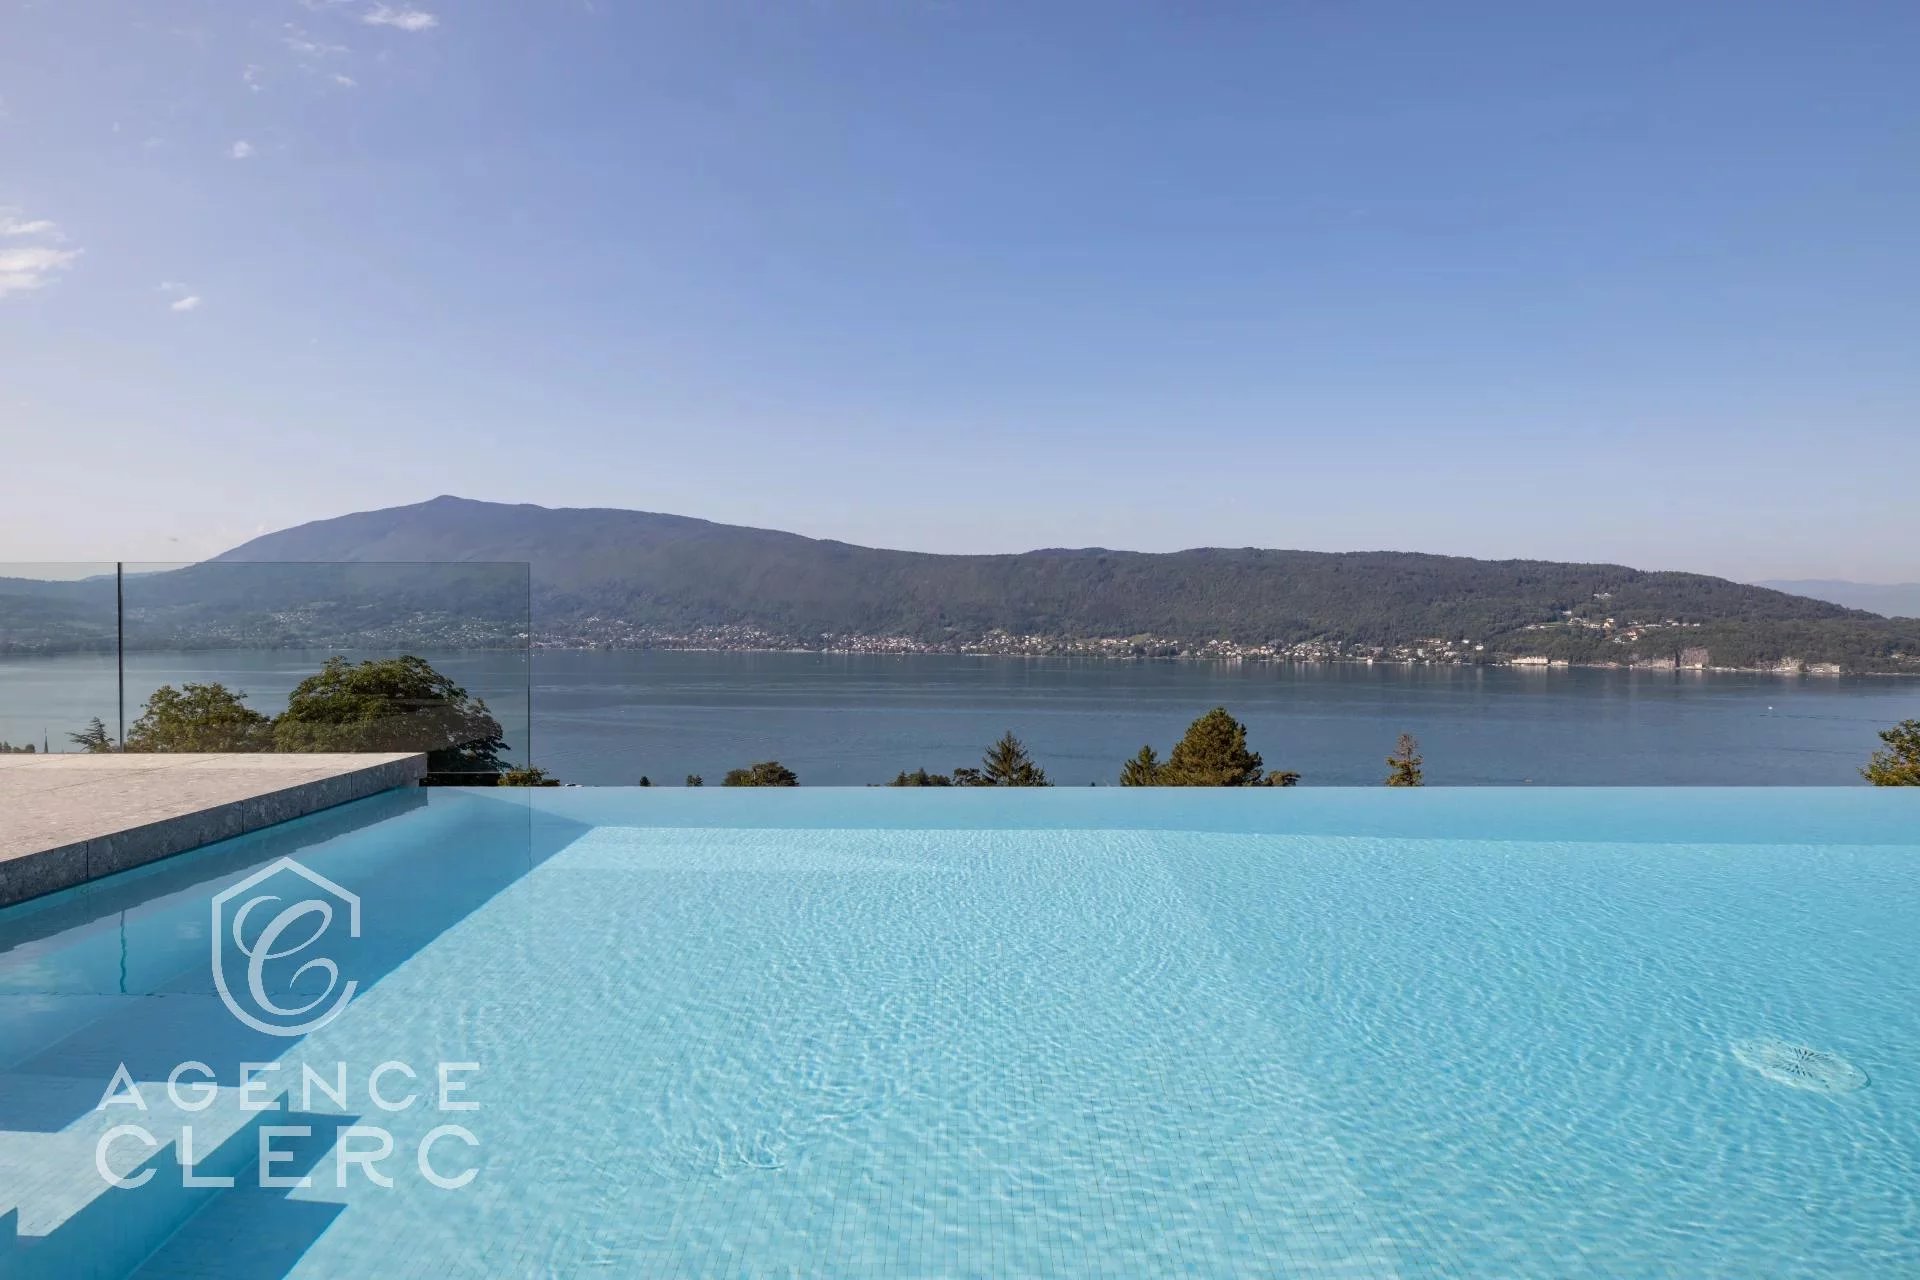 Veyrier du lac, property with panoramic view of the lake_1754